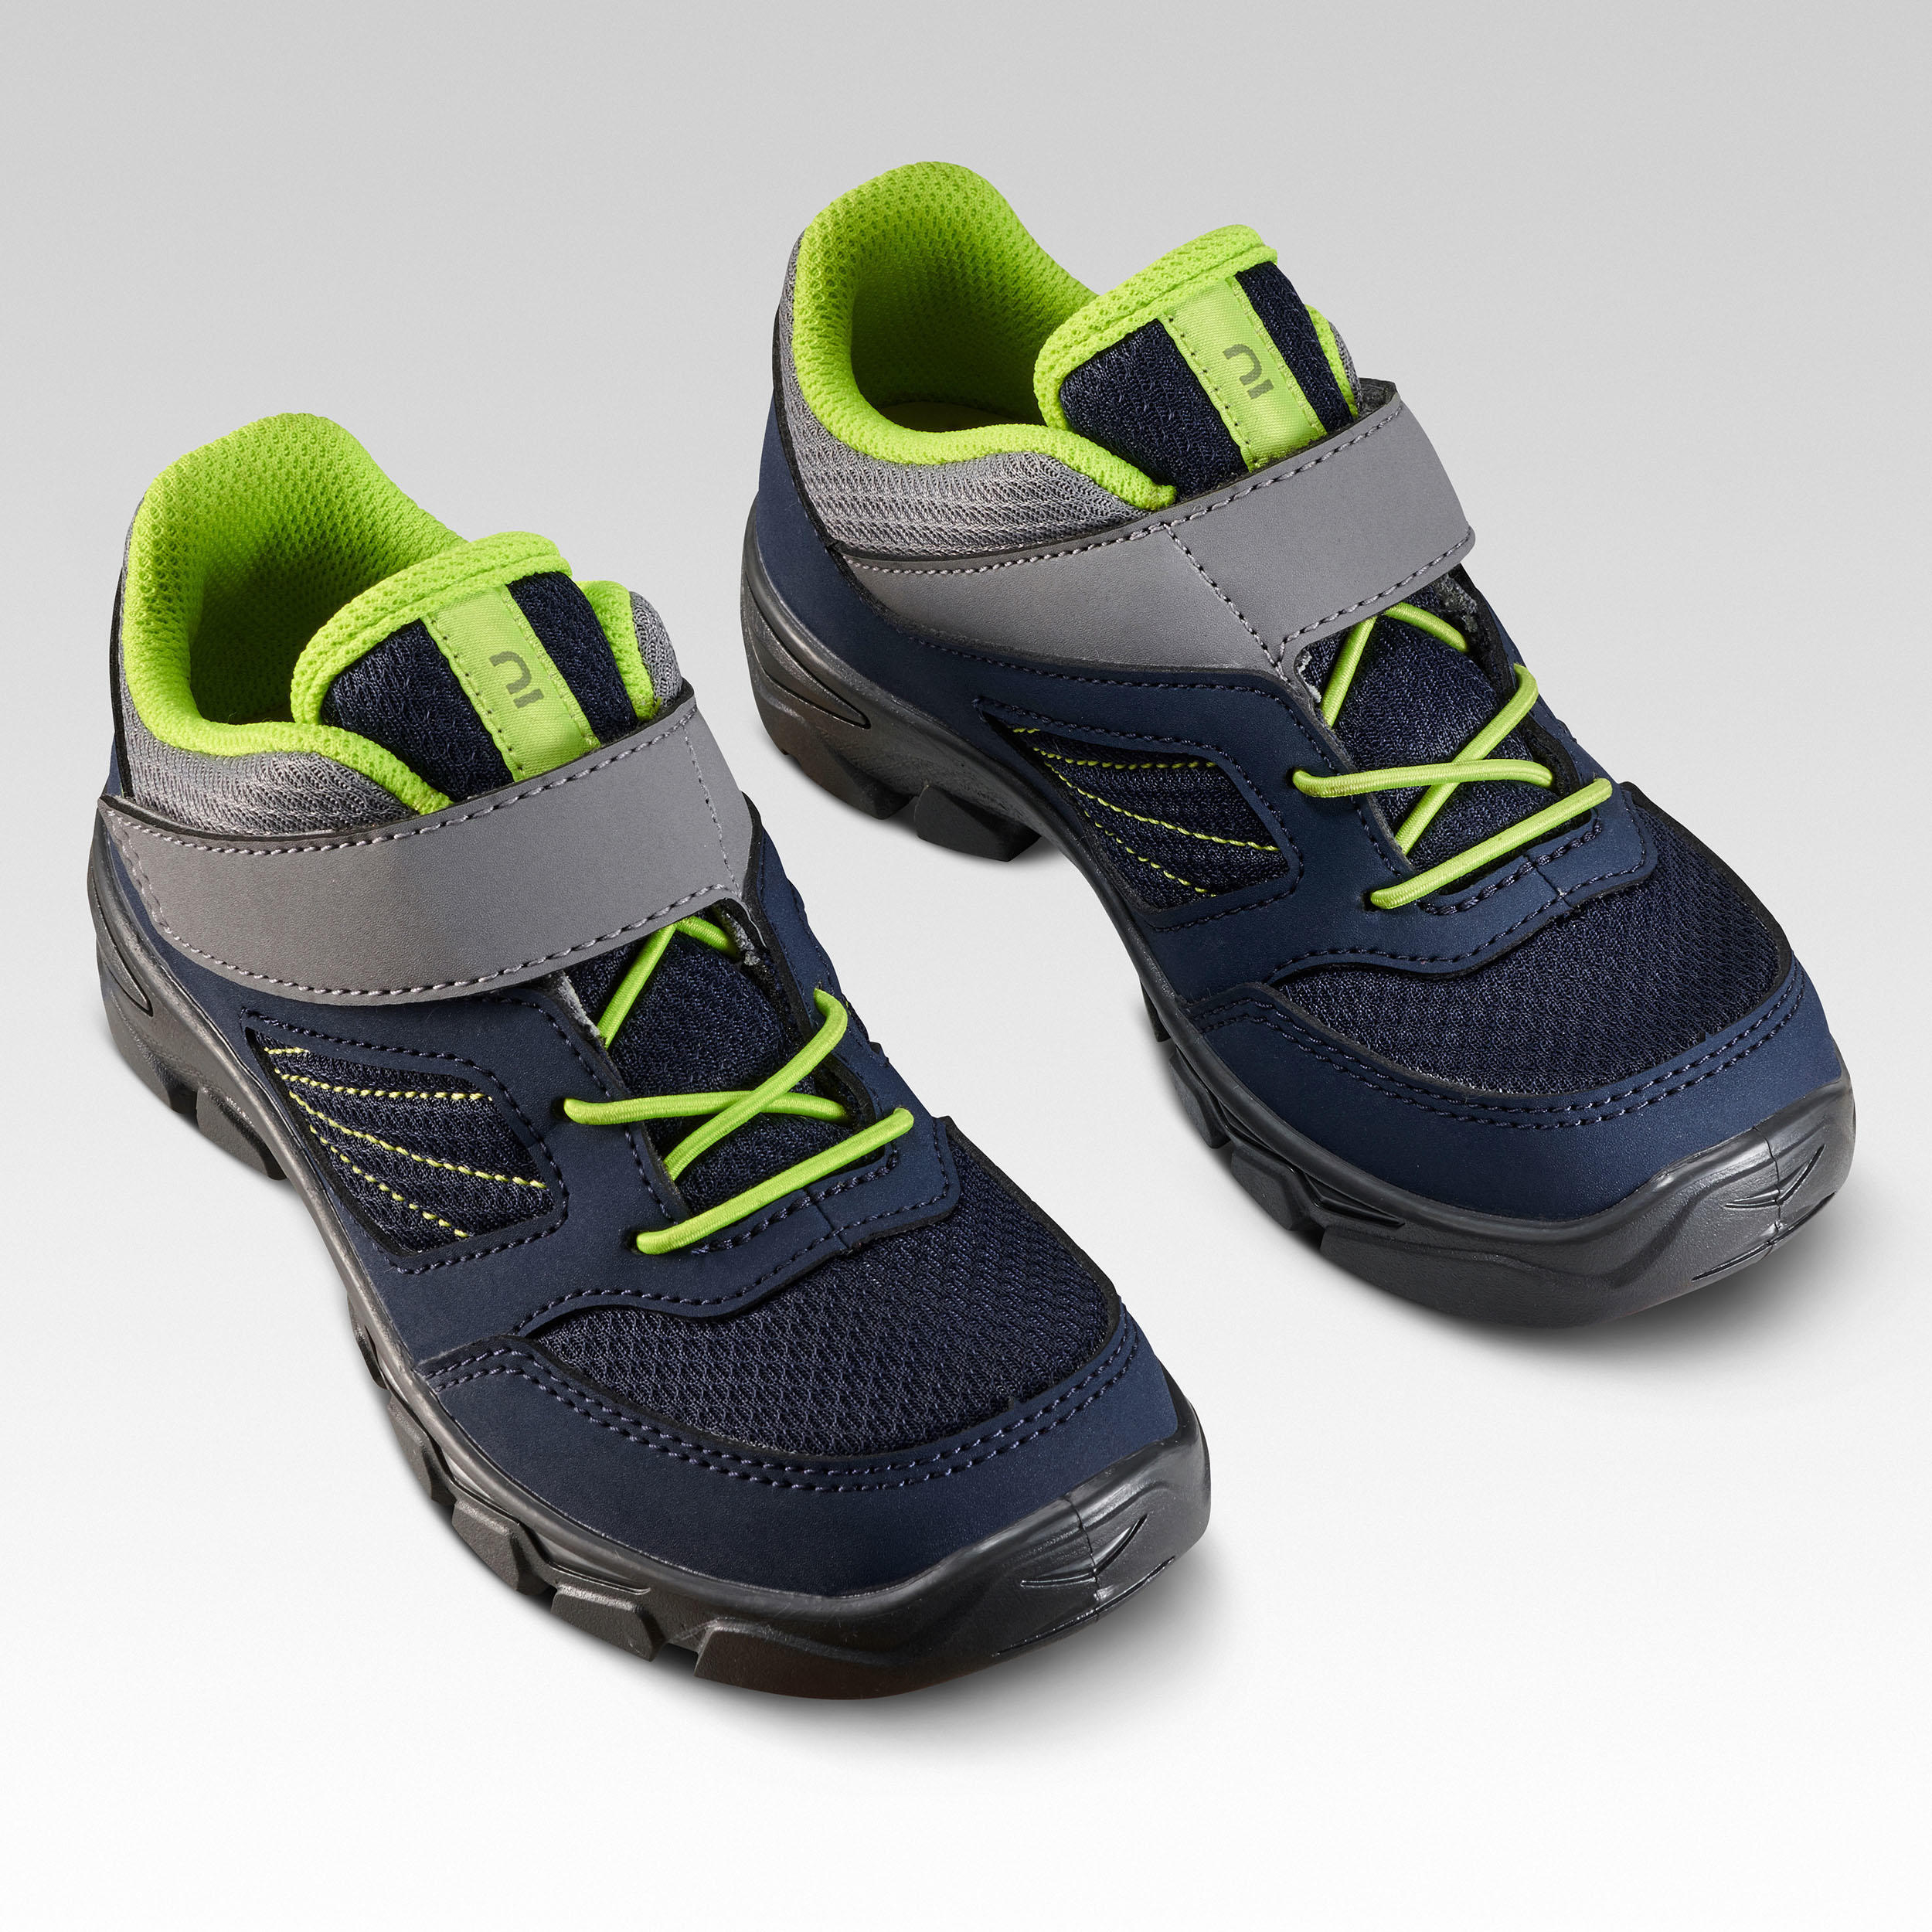 Kids' Velcro Hiking Shoes  NH100 - 24 to 34 - Blue 2/11